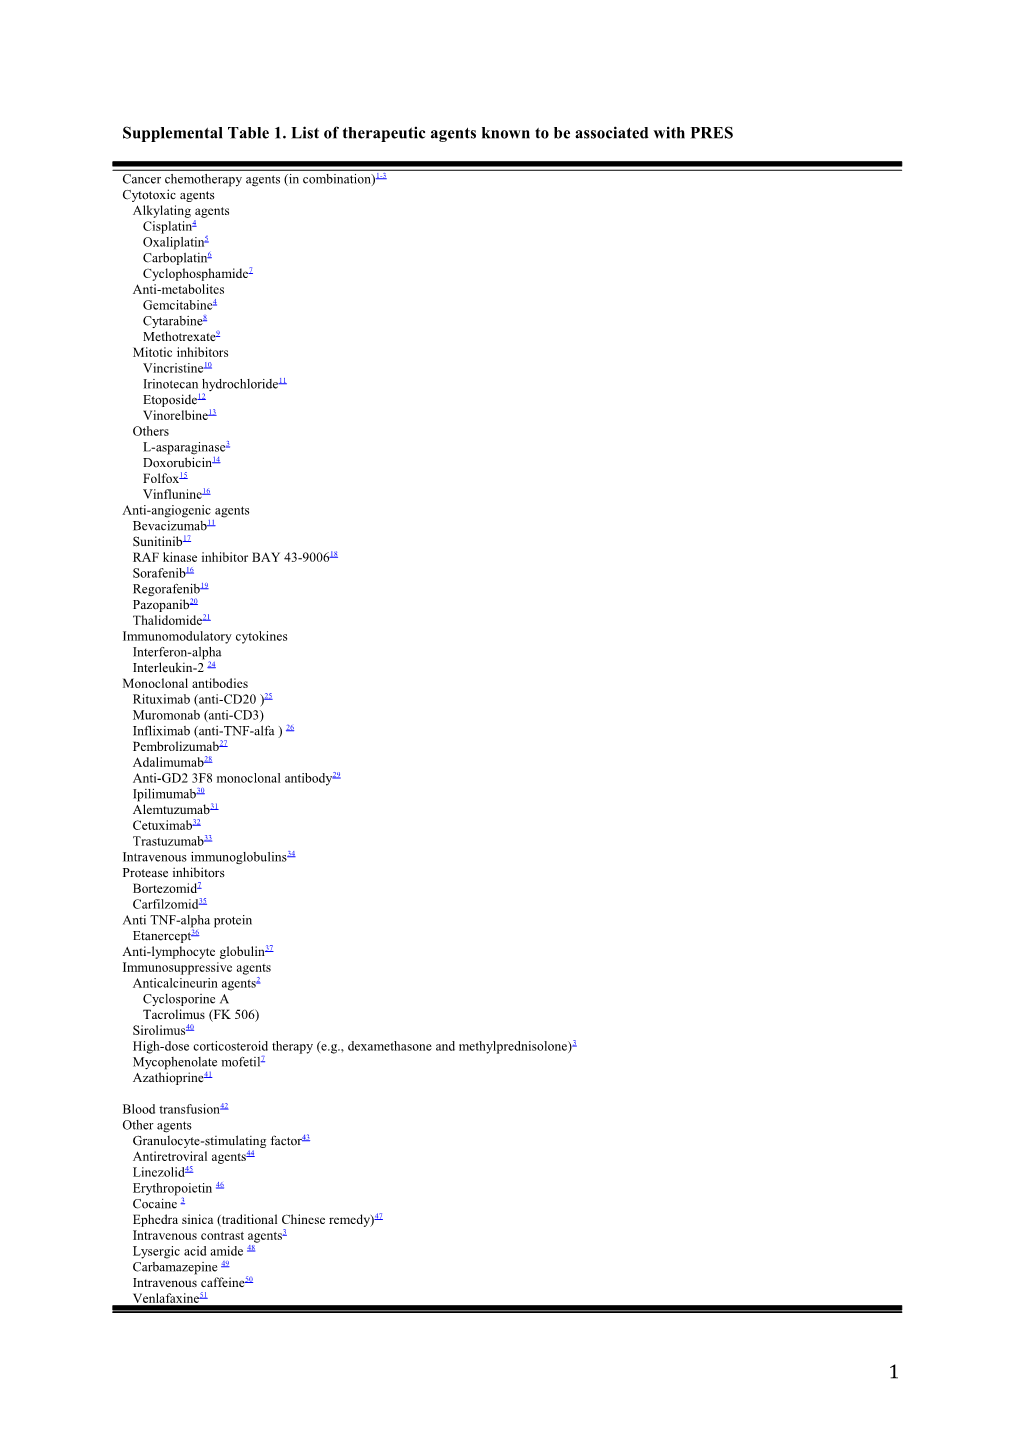 Supplemental Table 1. List of Therapeutic Agents Known to Be Associated with PRES